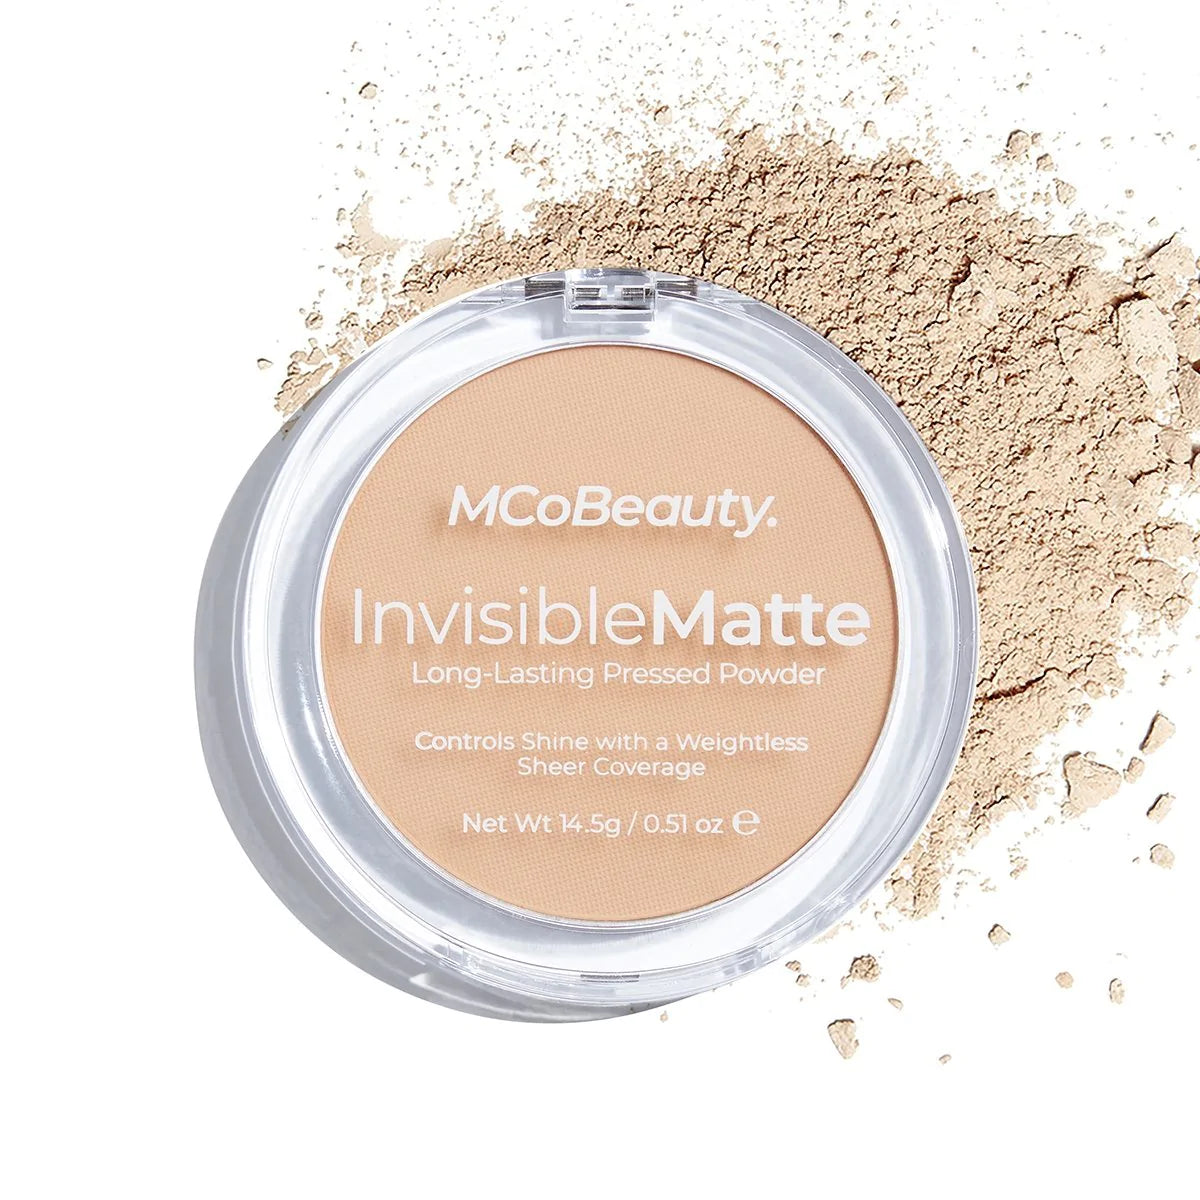 MCOBEAUTY Invisible Matte Long Lasting Pressed Powder - Translucent